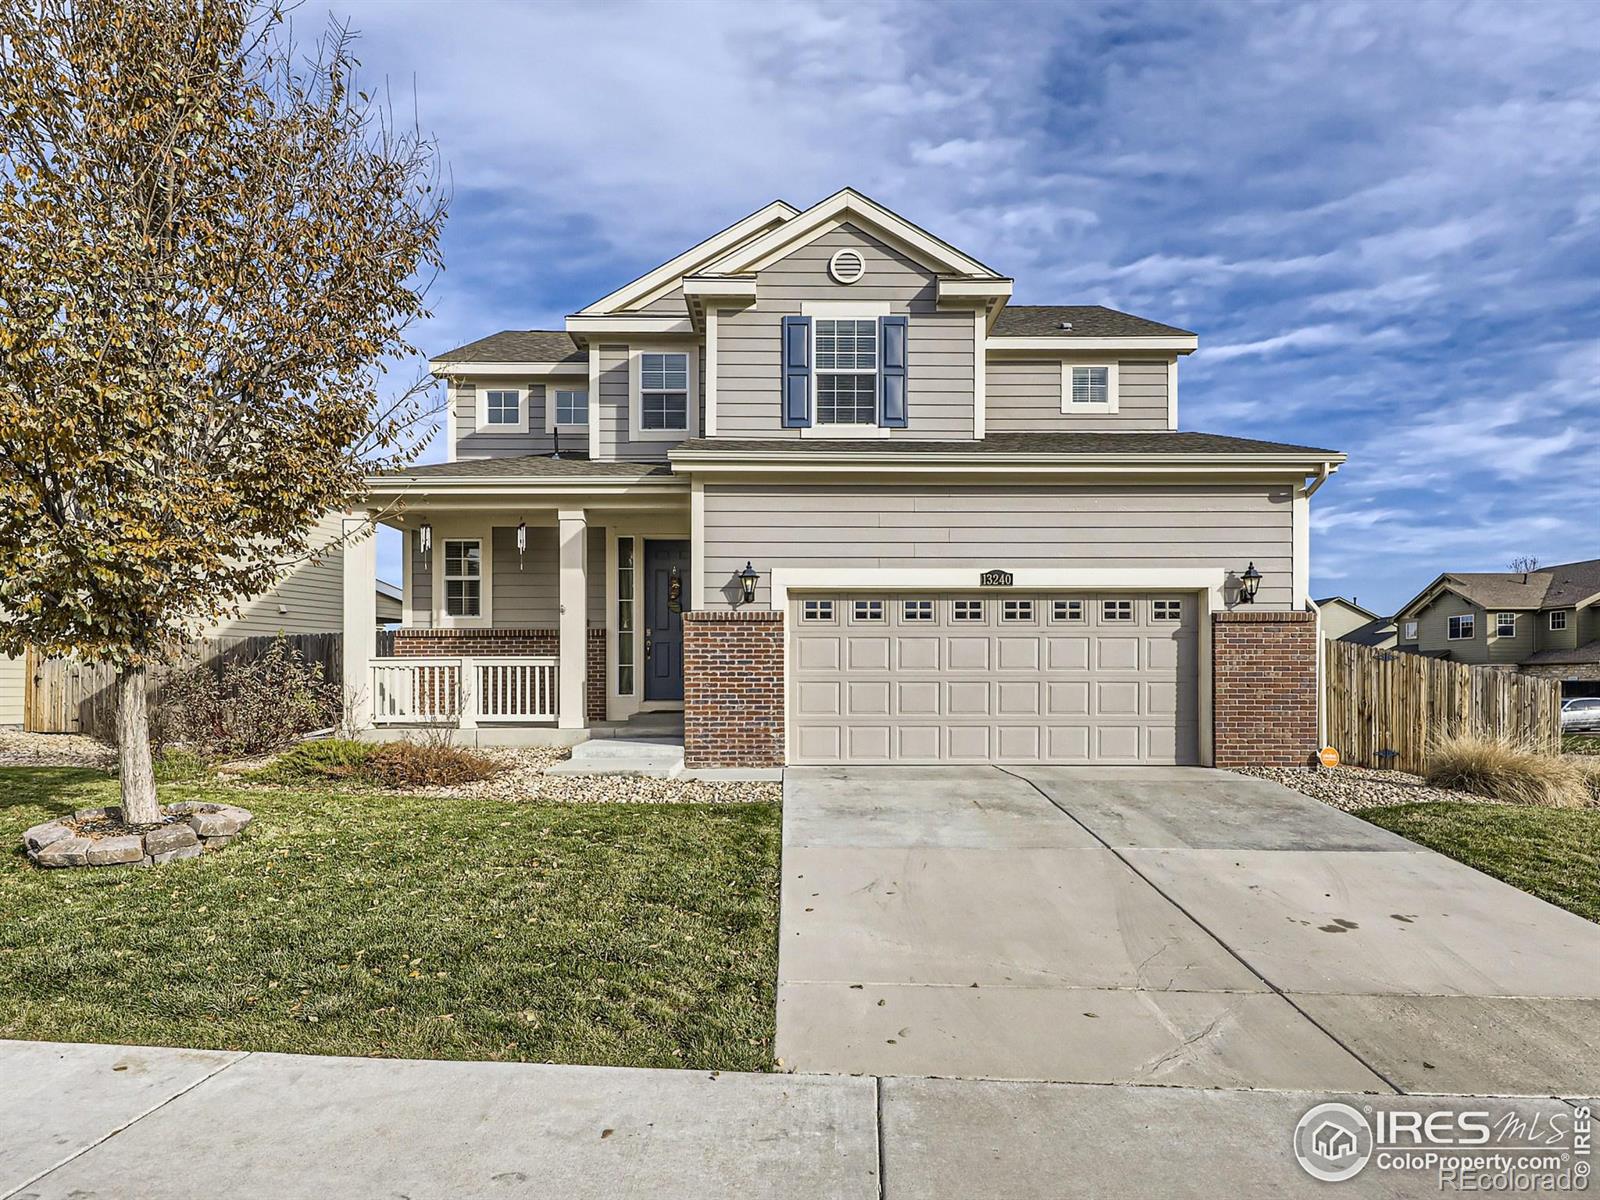 Report Image for 13240  Olive Way,Thornton, Colorado